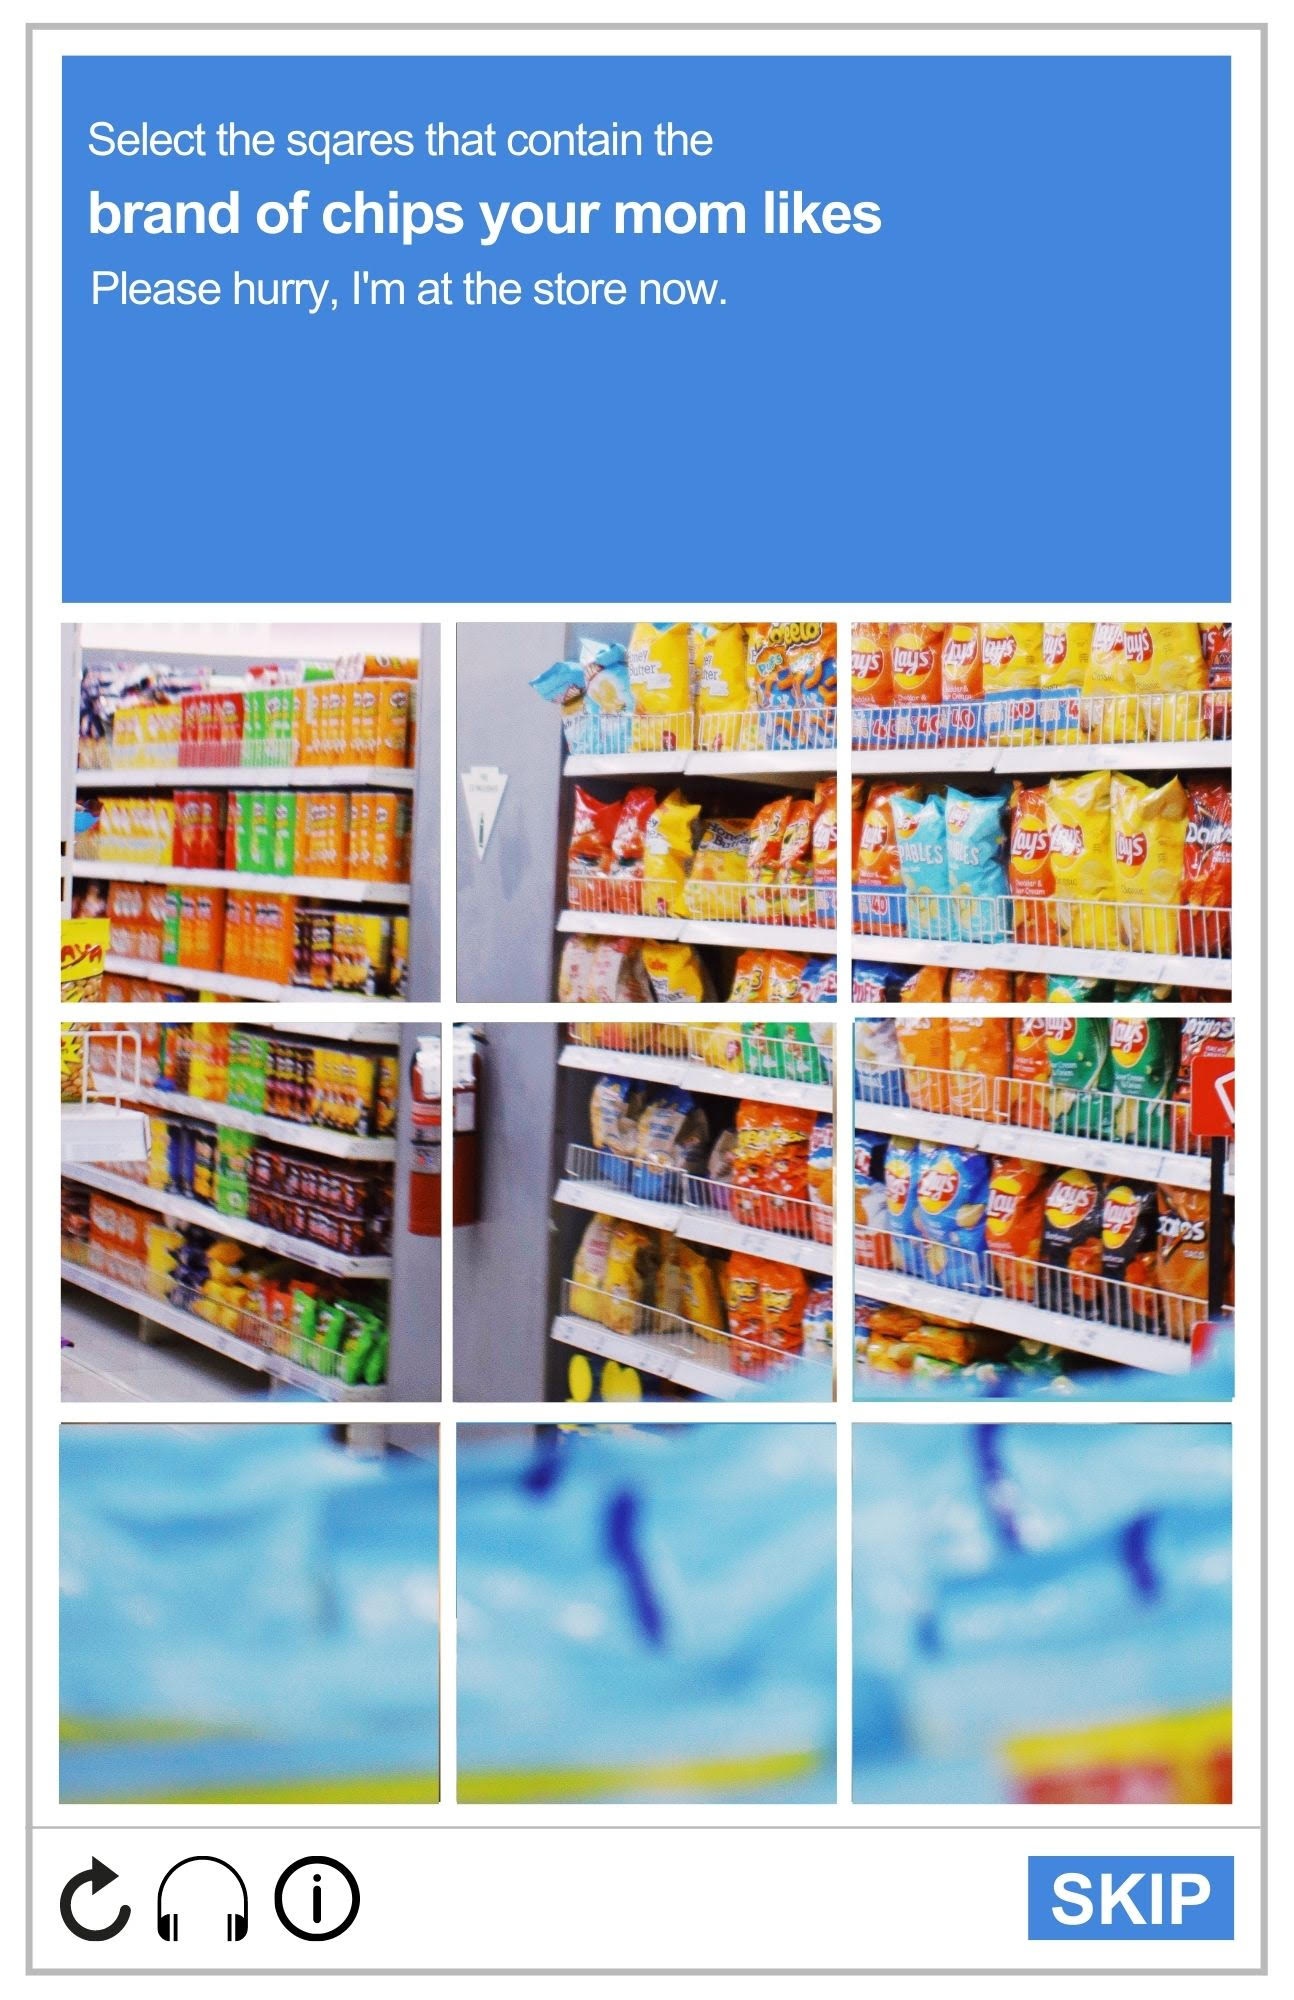 Imagie of a reCAPTCHA board, featuring one photo of a snacks and potato chip aisle at a supermarket. The prompt reads: Select the squares that contain the brand of chips your mom likes. Please hurry, I'm in the store now.